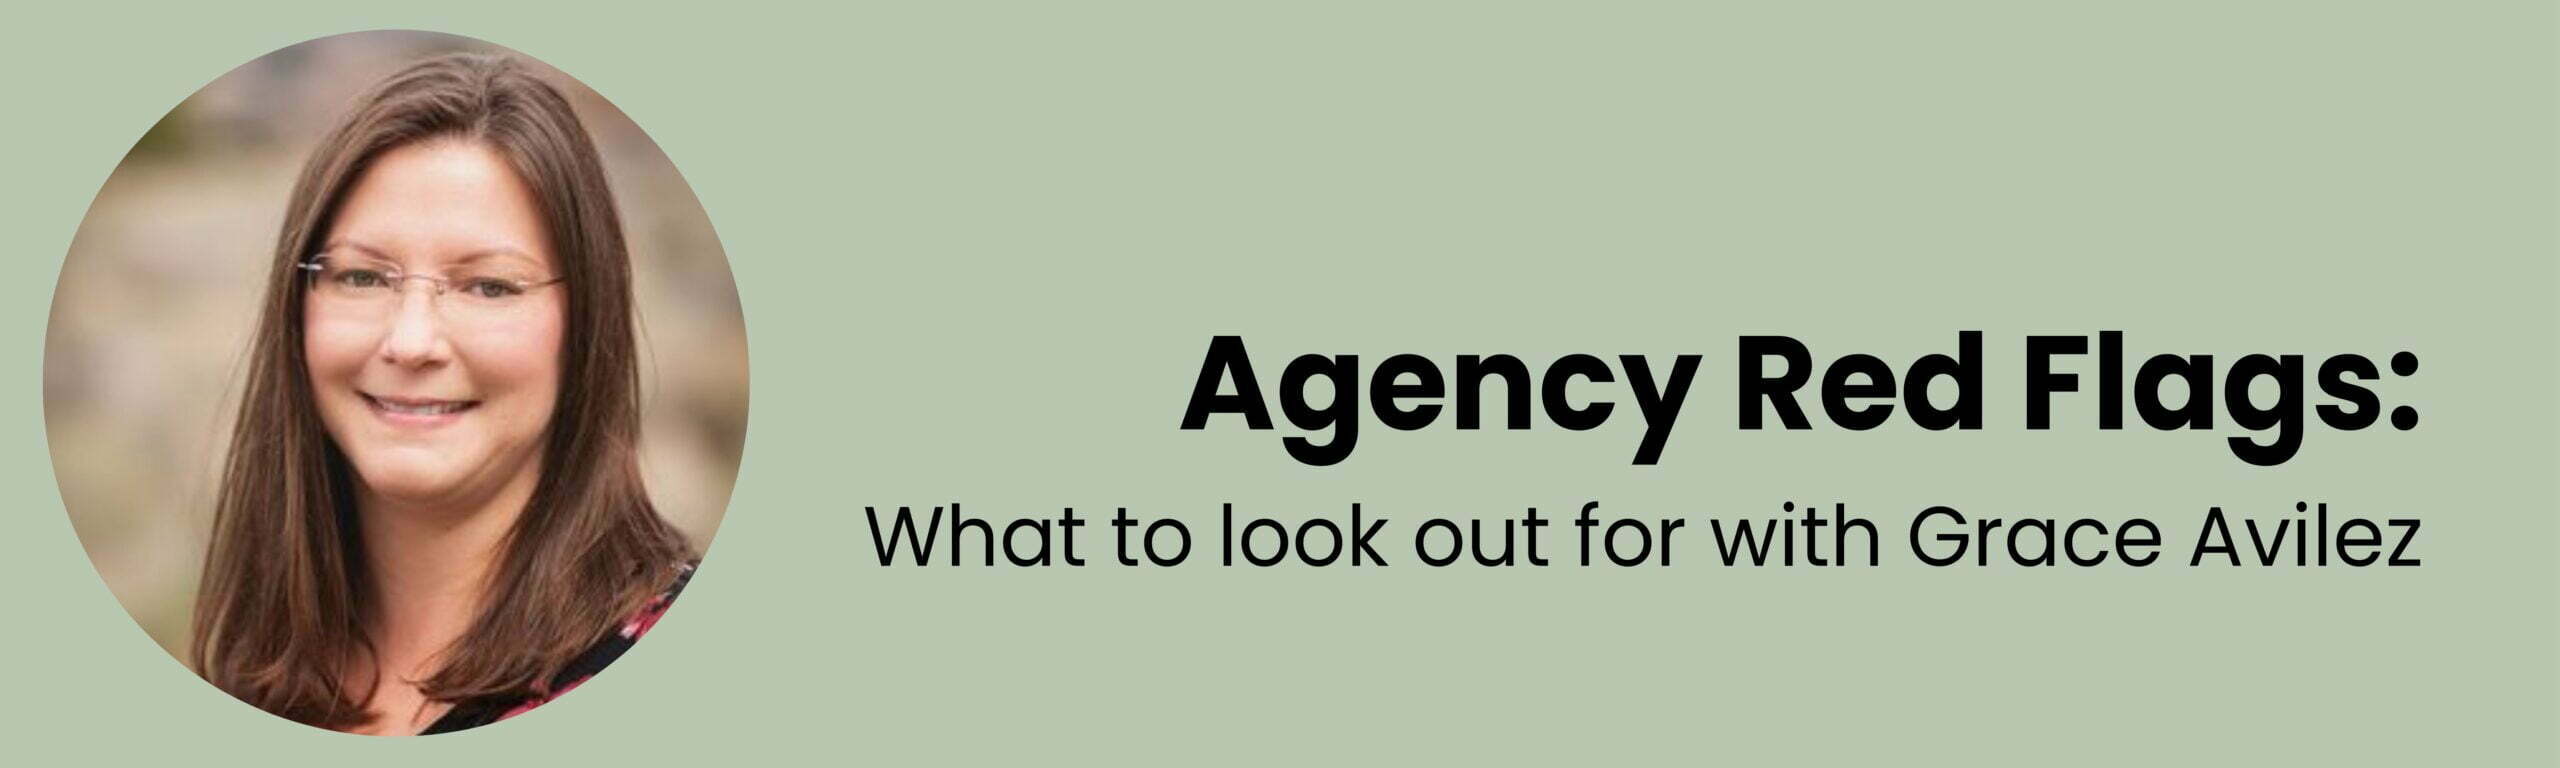 content marketing agency red flags